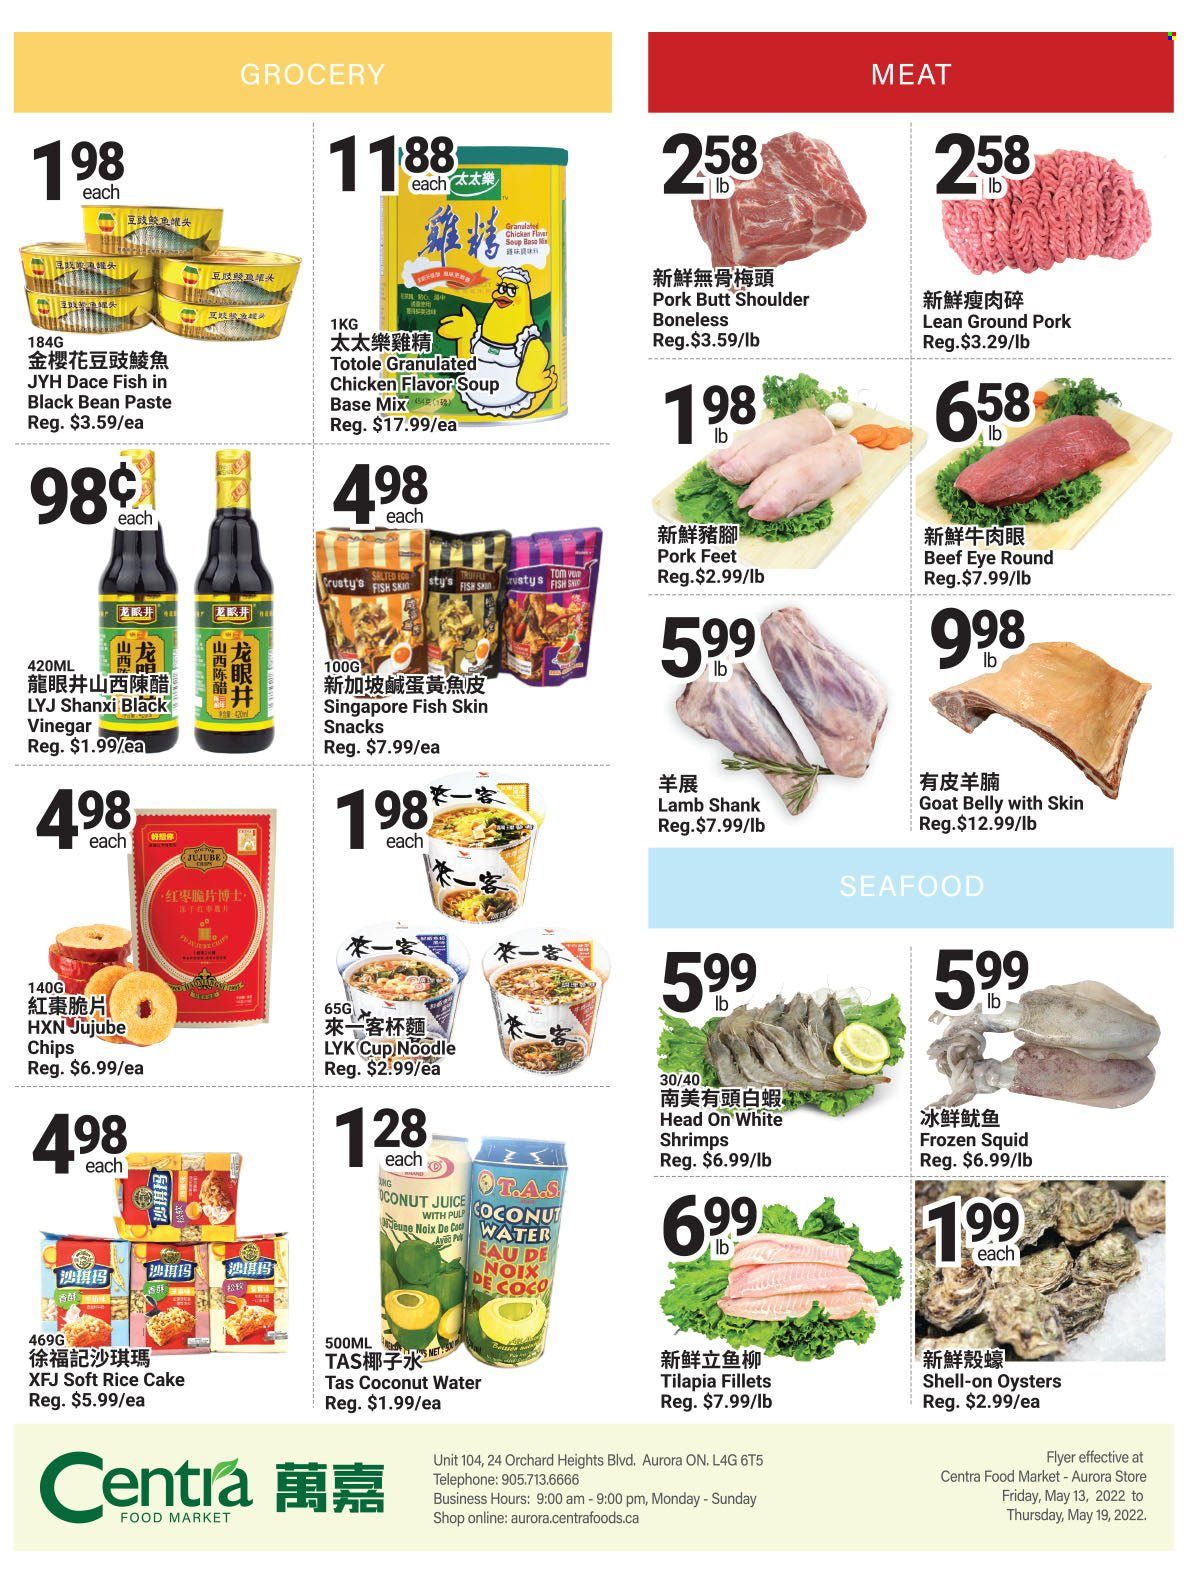 thumbnail - Centra Food Market Flyer - May 13, 2022 - May 19, 2022 - Sales products - jujube, squid, tilapia, oysters, seafood, fish, shrimps, soup, noodles, snack, rice, juice, coconut water, beef meat, eye of round, ground pork, pork meat, lamb meat, lamb shank, cup. Page 4.